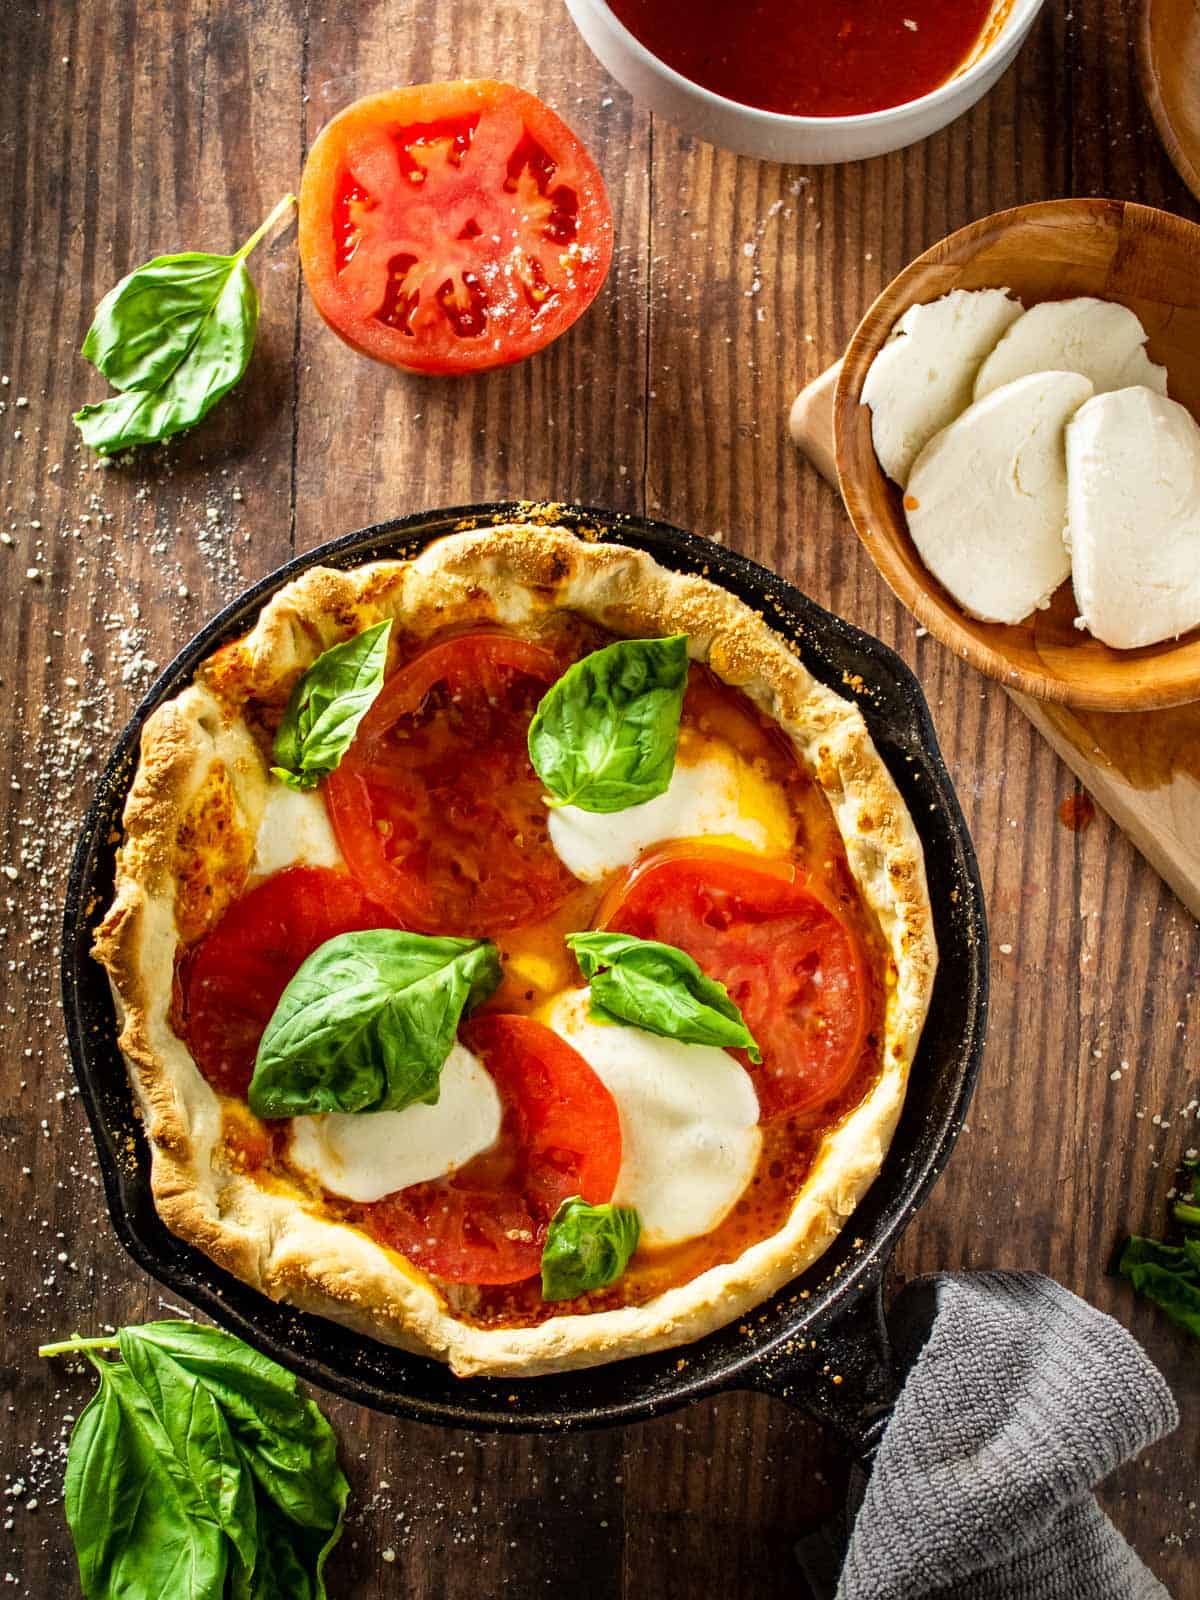 pizza in a cast iron skillet with tomatoes, cheese and fresh basil on it and in bowls around.